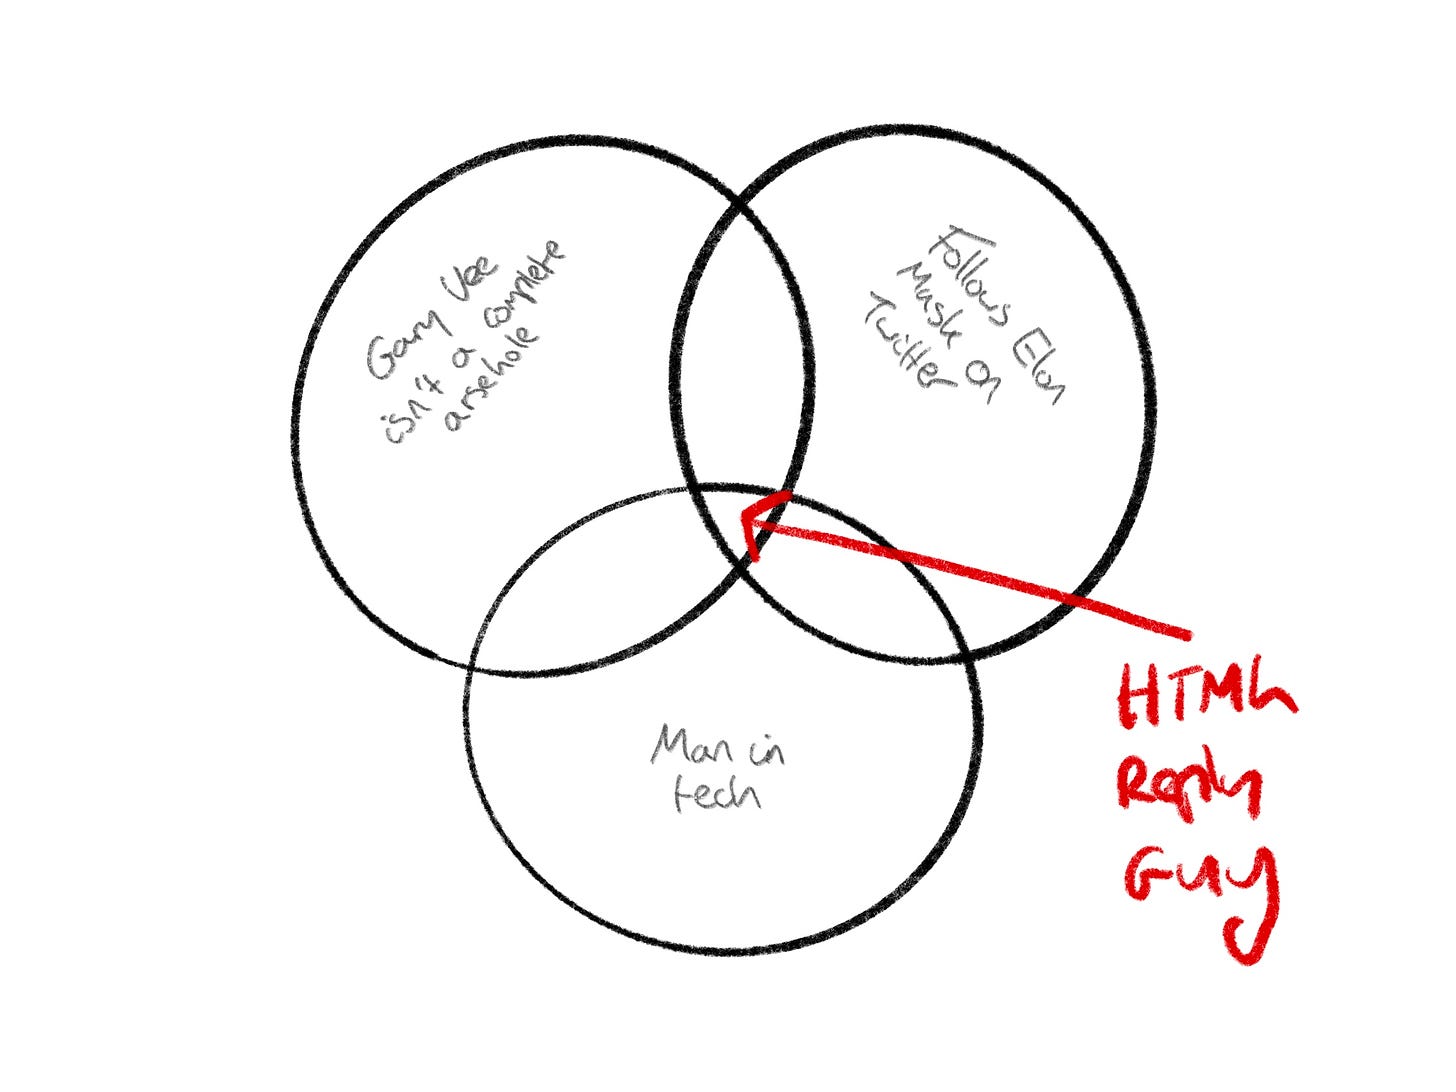 A venn diagram as described below with a big red arrow and red text that reads “HTML reply guy”